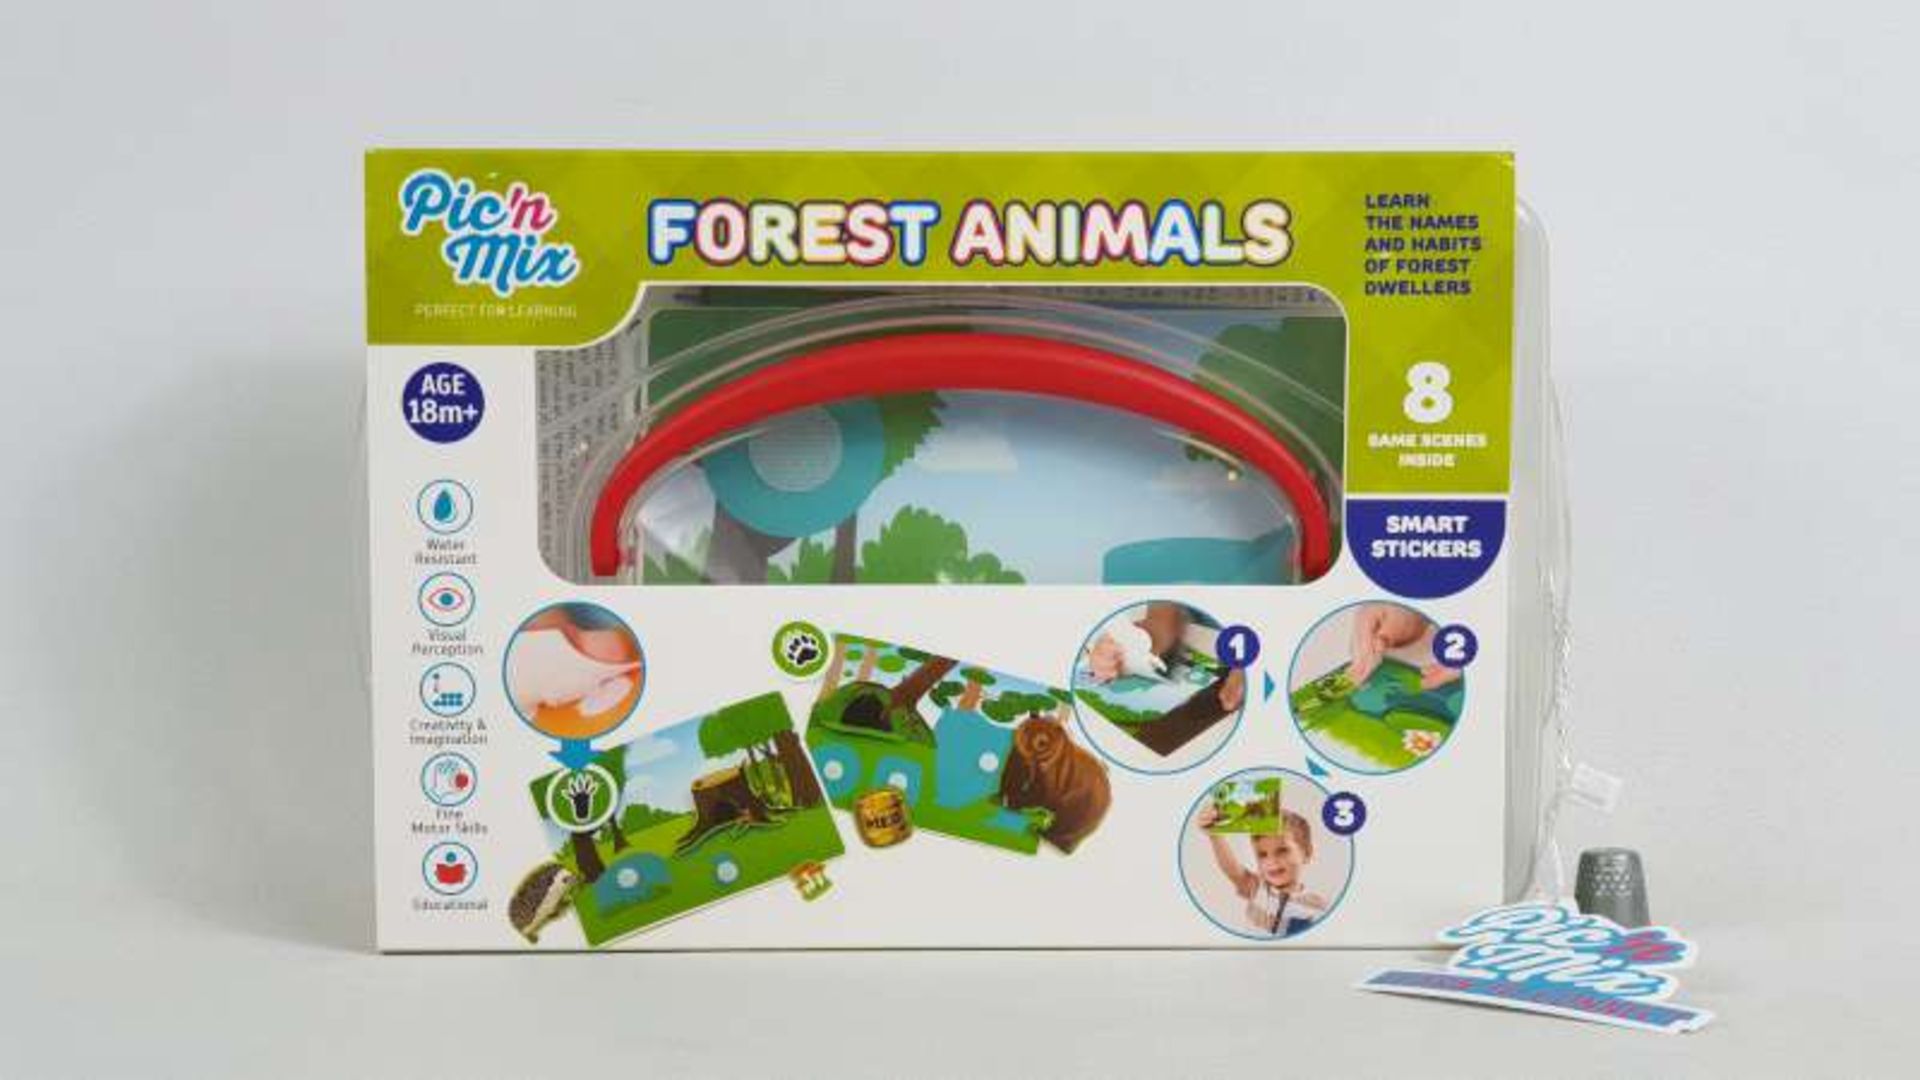 24 X PIC N MIX FOREST ANIMALS IN 1 BOX